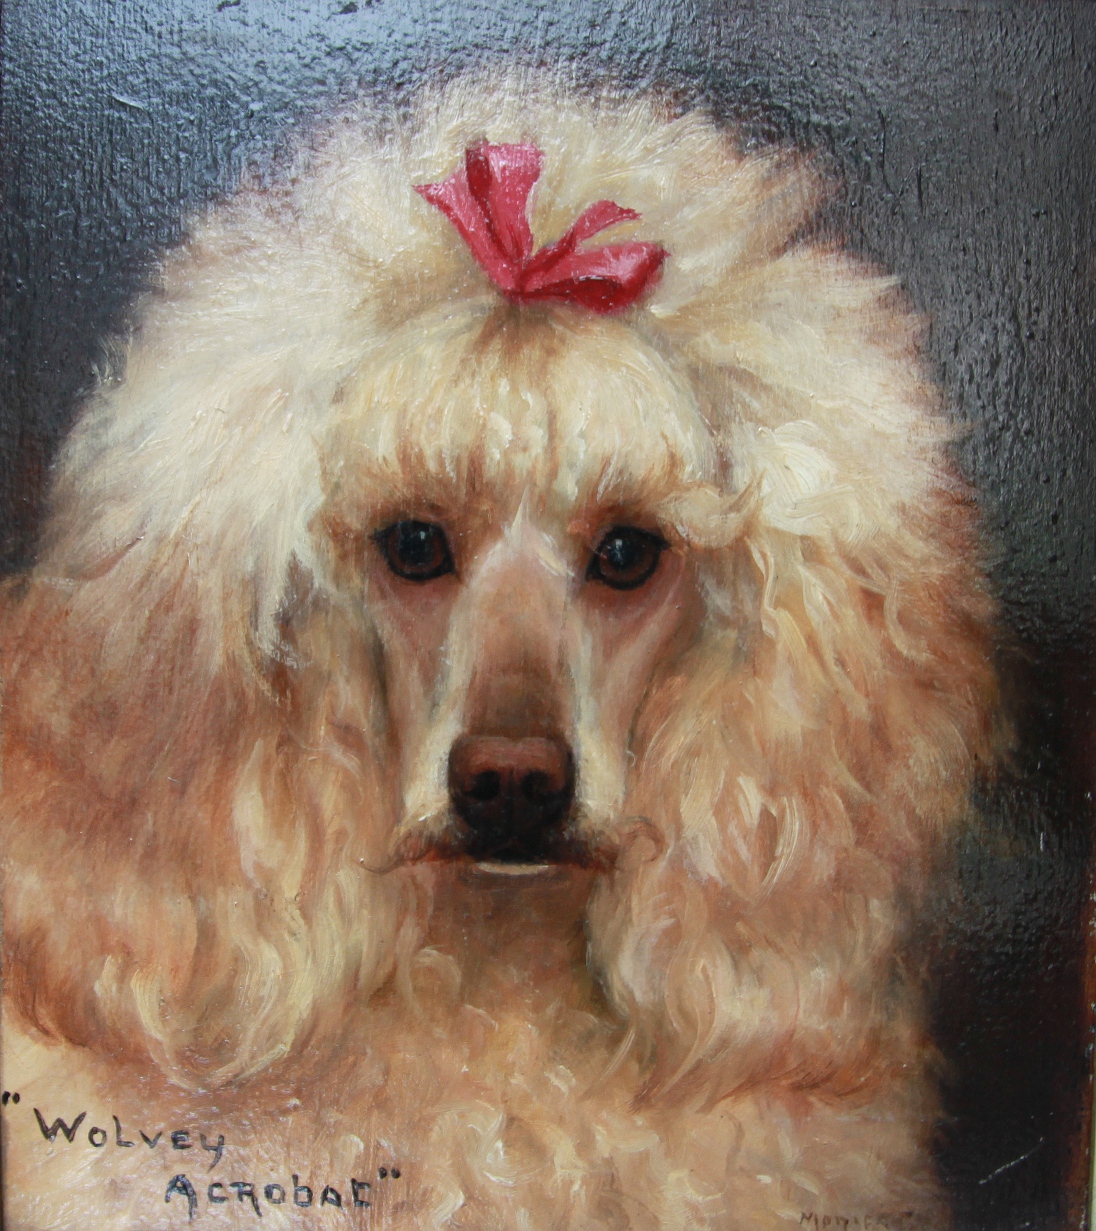 Click to see full size: Poodle ?Wolvey Acrobat? by Monica Gray (exh 1903-1919)